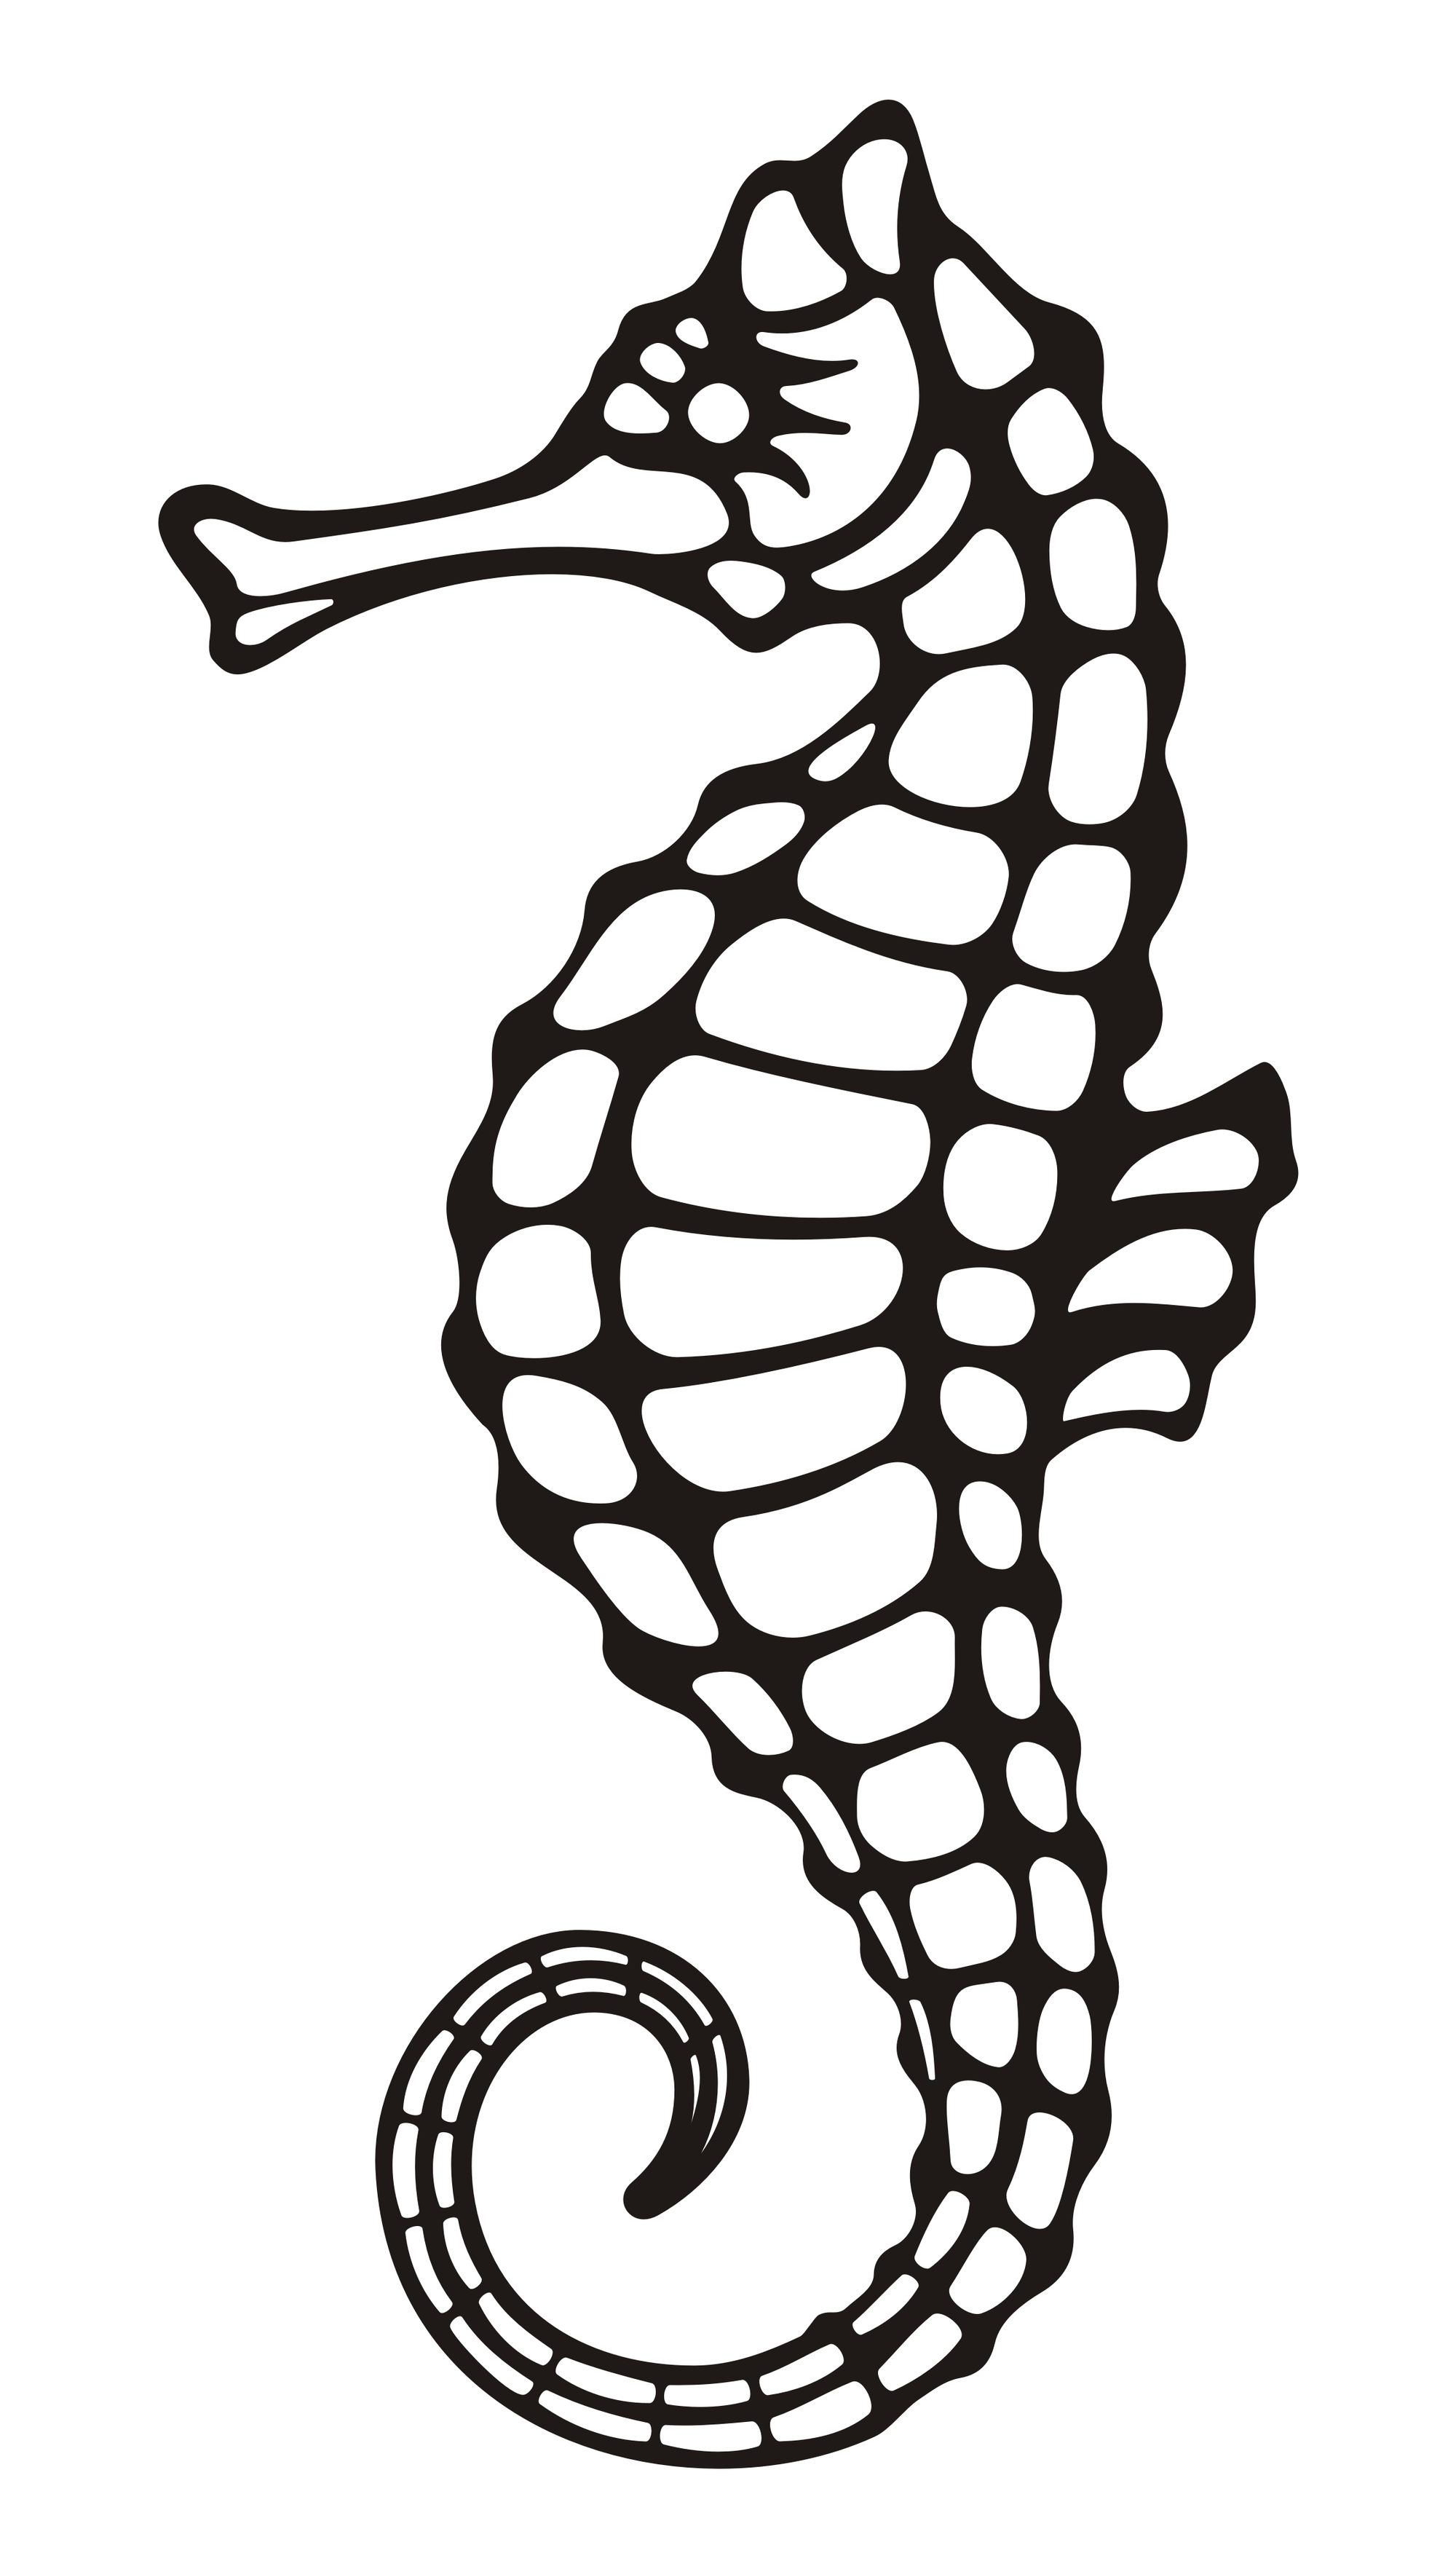 Seahorse Drawing - ClipArt Best